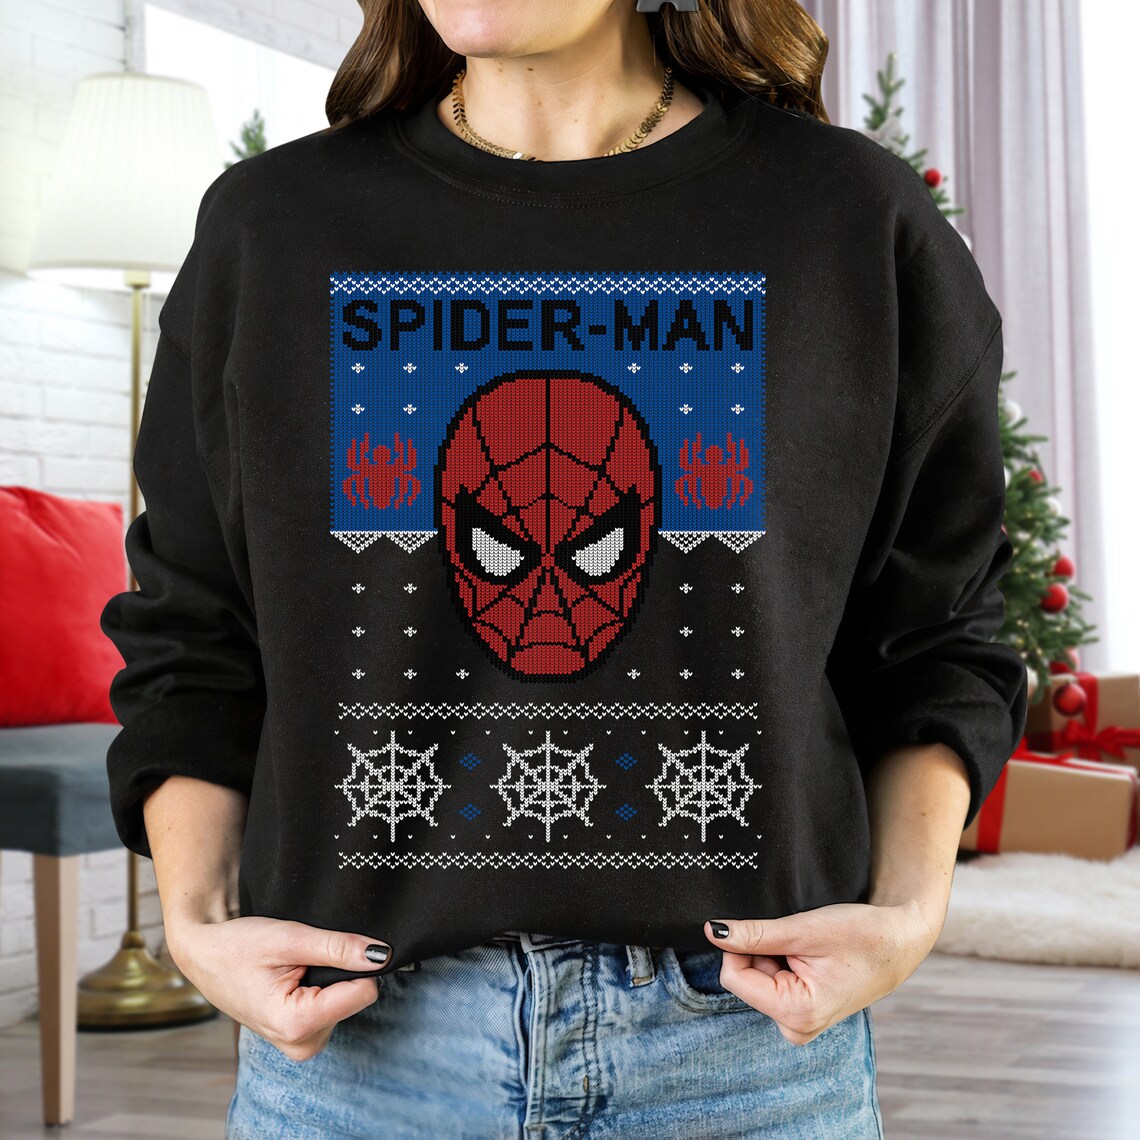 Spider-Man Face Sweater Christmas